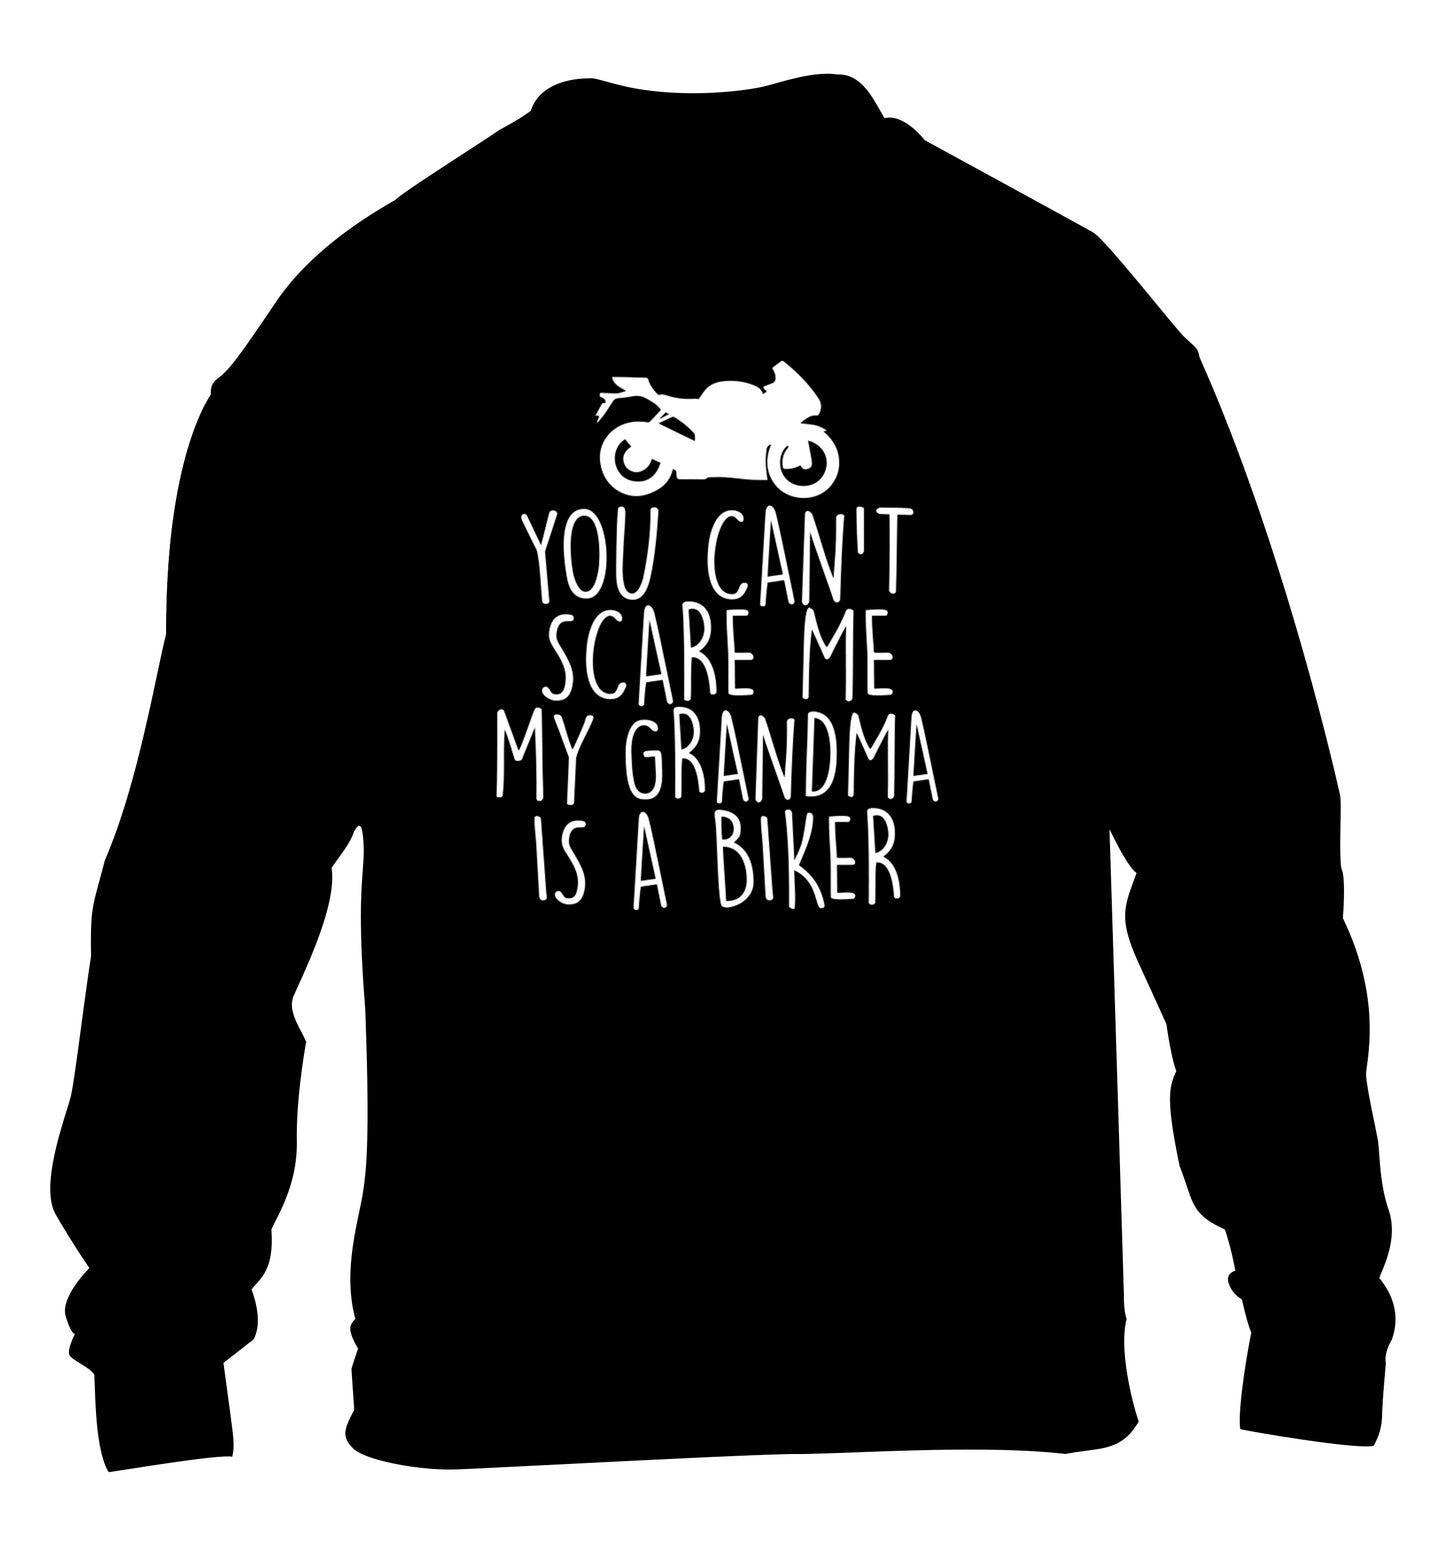 You can't scare me my grandma is a biker children's black sweater 12-13 Years